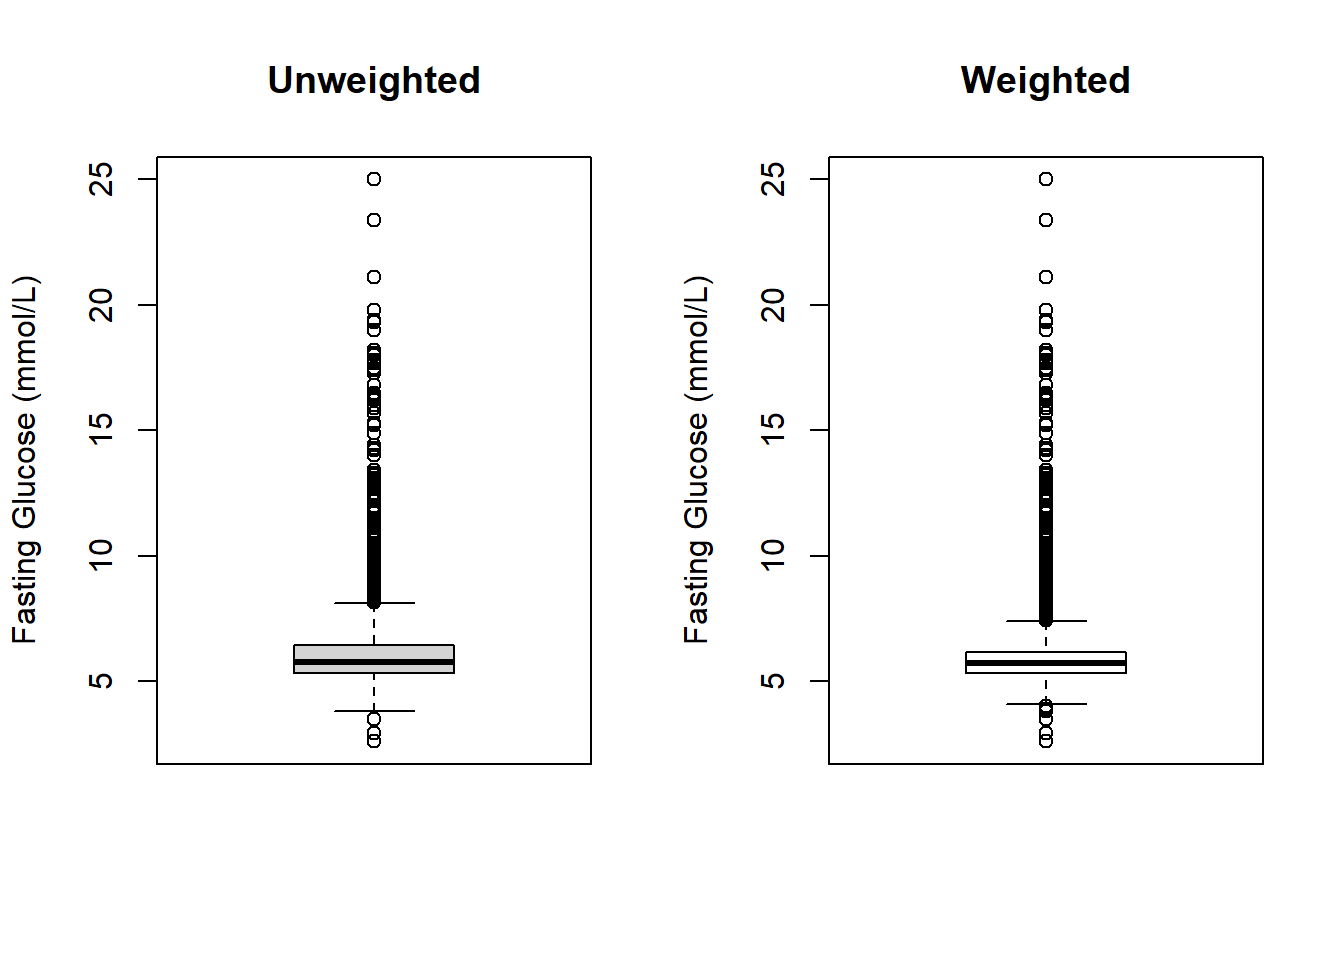 Unweighted vs. weighted boxplots